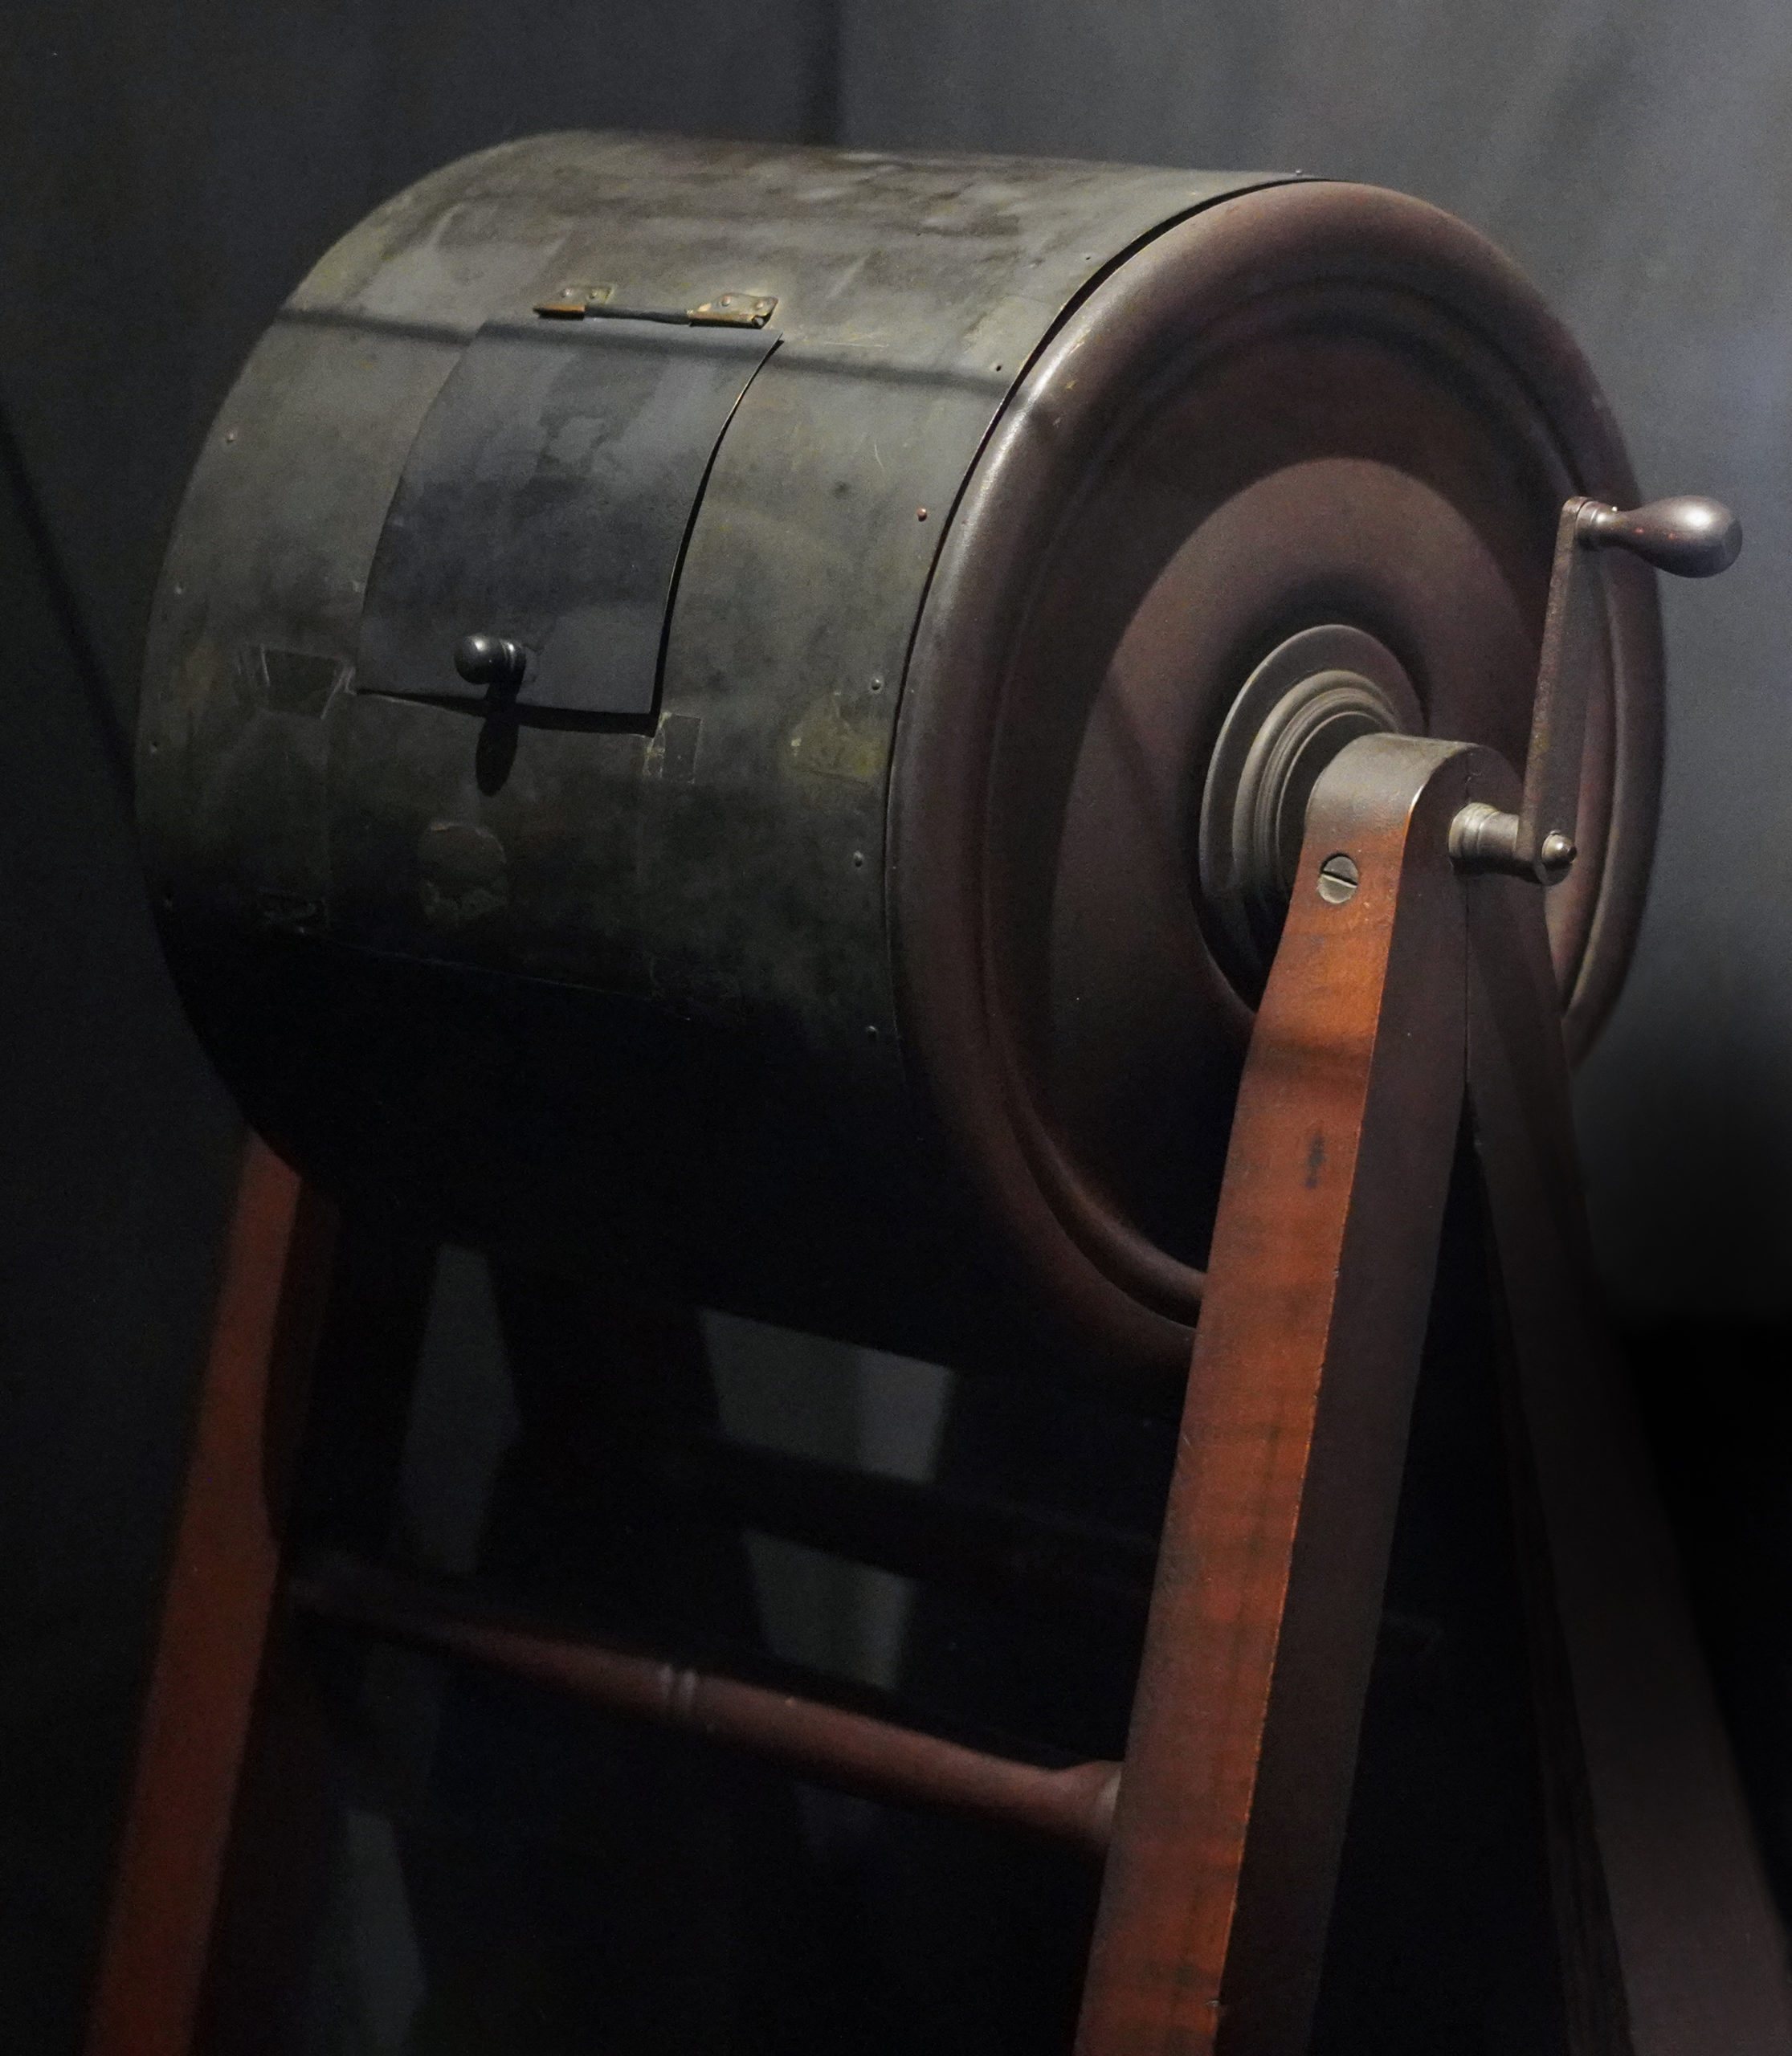 Draft cylinder, c. 1863, used to draw names of men aged 20–45 until a community’s quota was reached per the 1863 Enrollment Act (photo: Steven Zucker, CC BY-NC-SA 2.0)